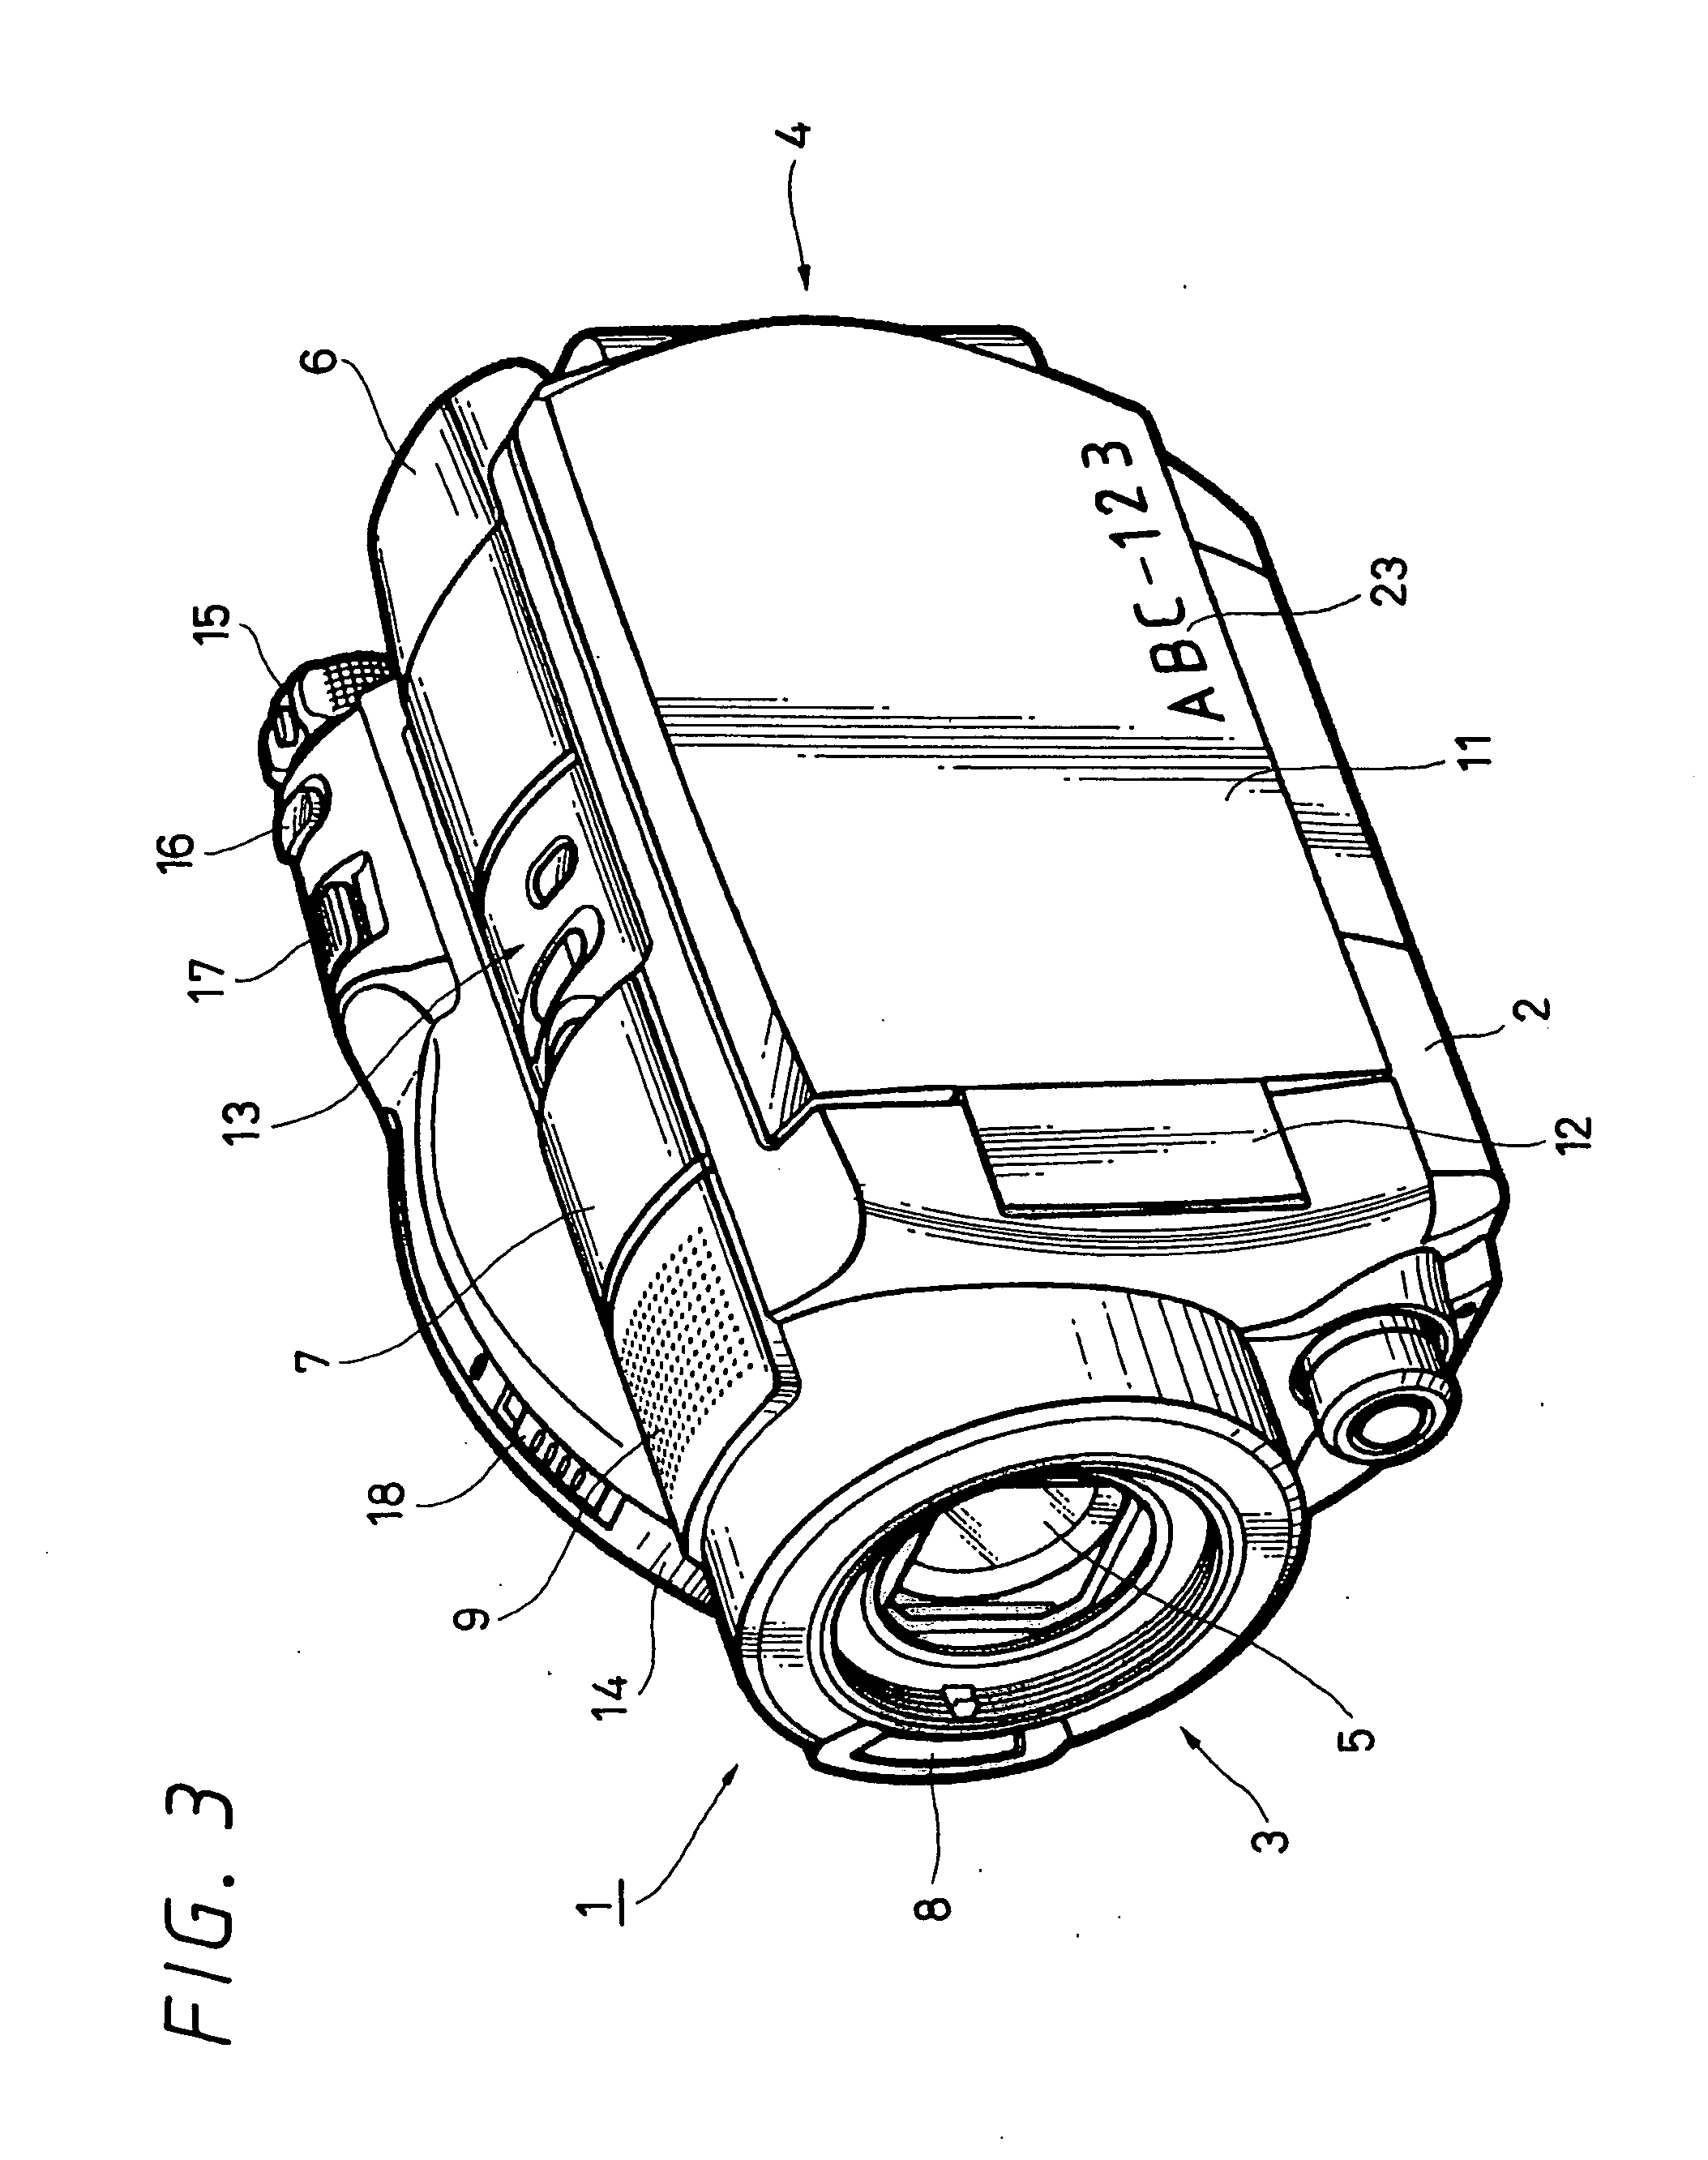 Coated-product with marking, process for manufacturing the same, and enclosure for electronic apparatus